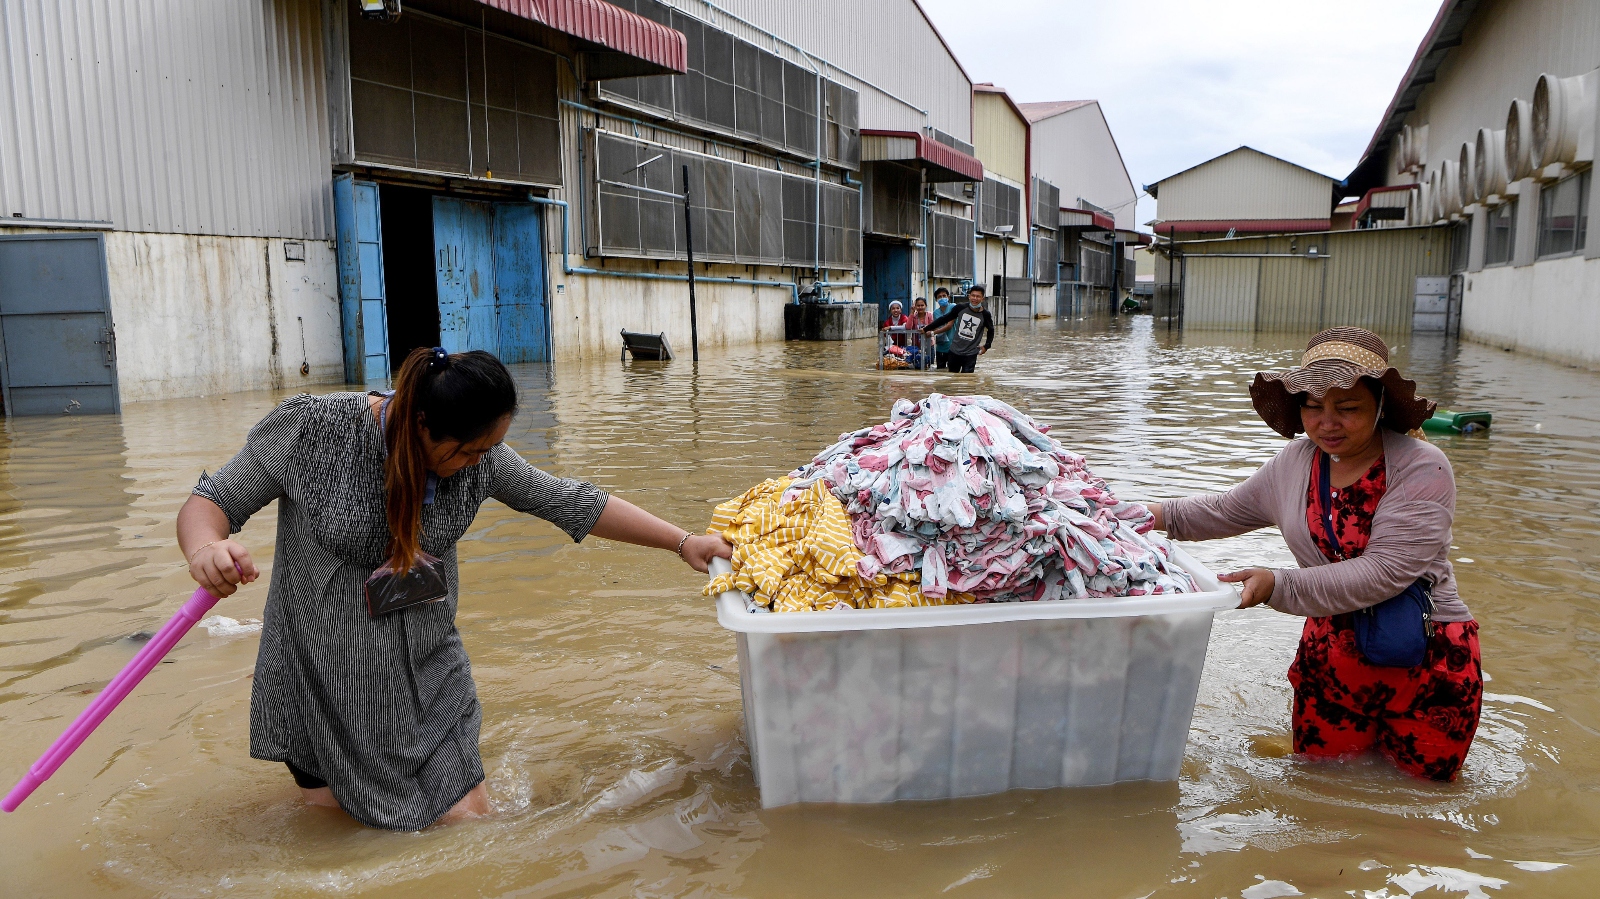 Textile workers wade through floodwaters in Cambodia.